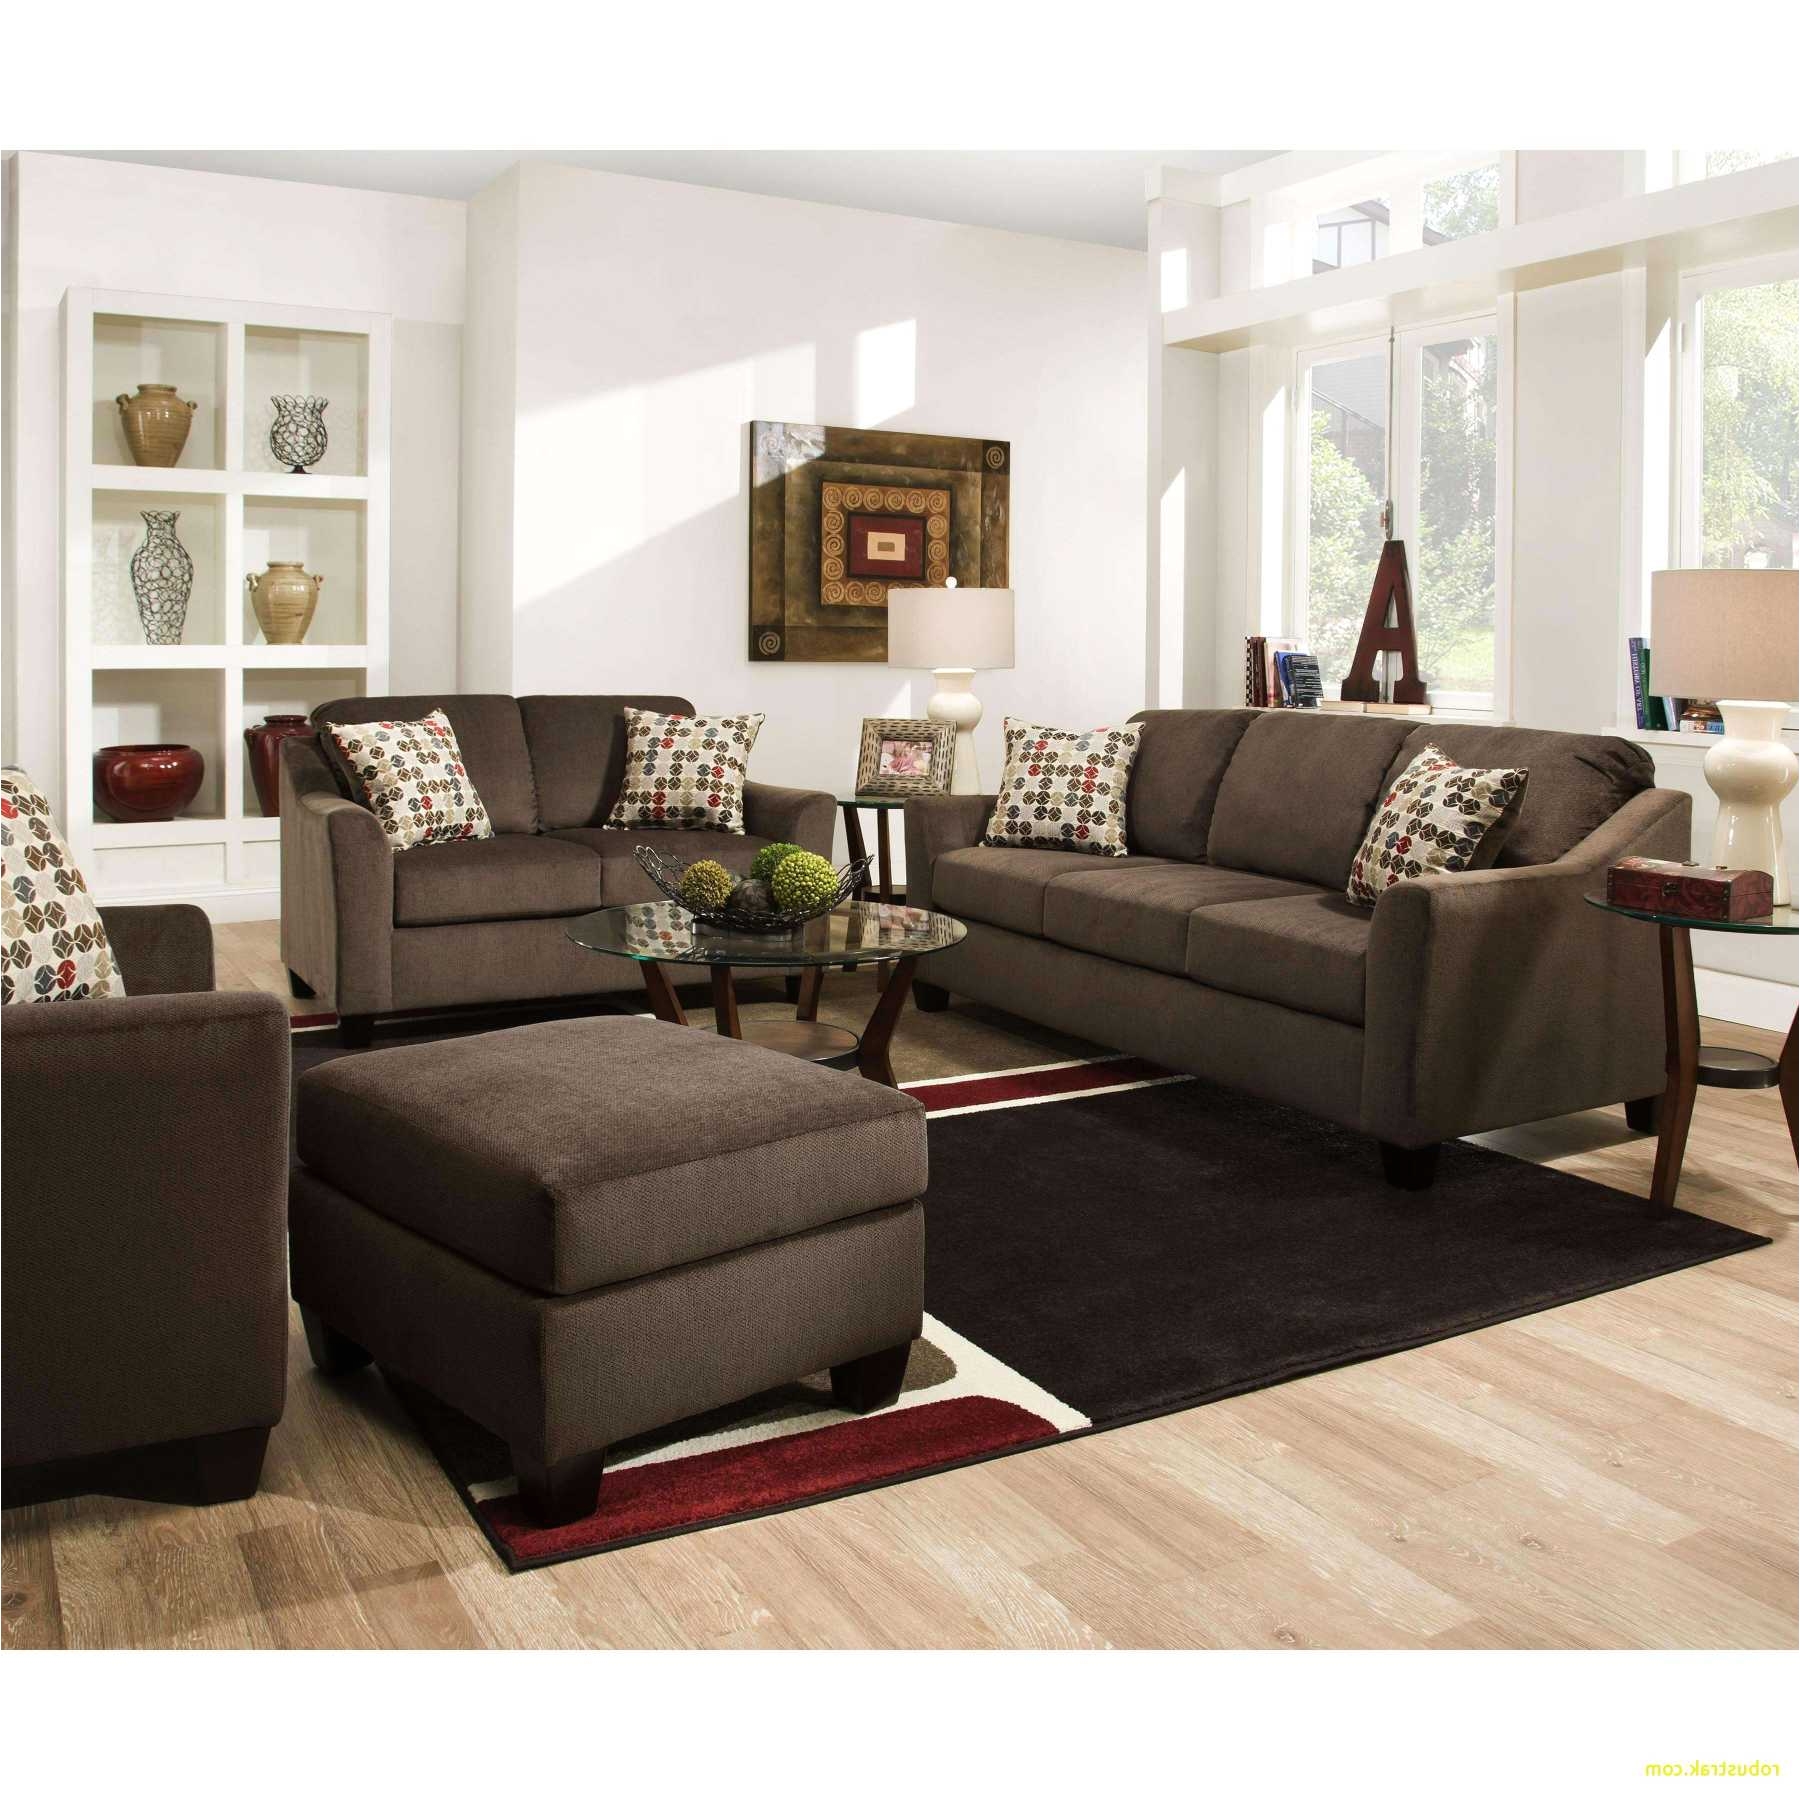 full size of furniture cheap small couches elegant furniture small couches elegant davenport couch 0d 37